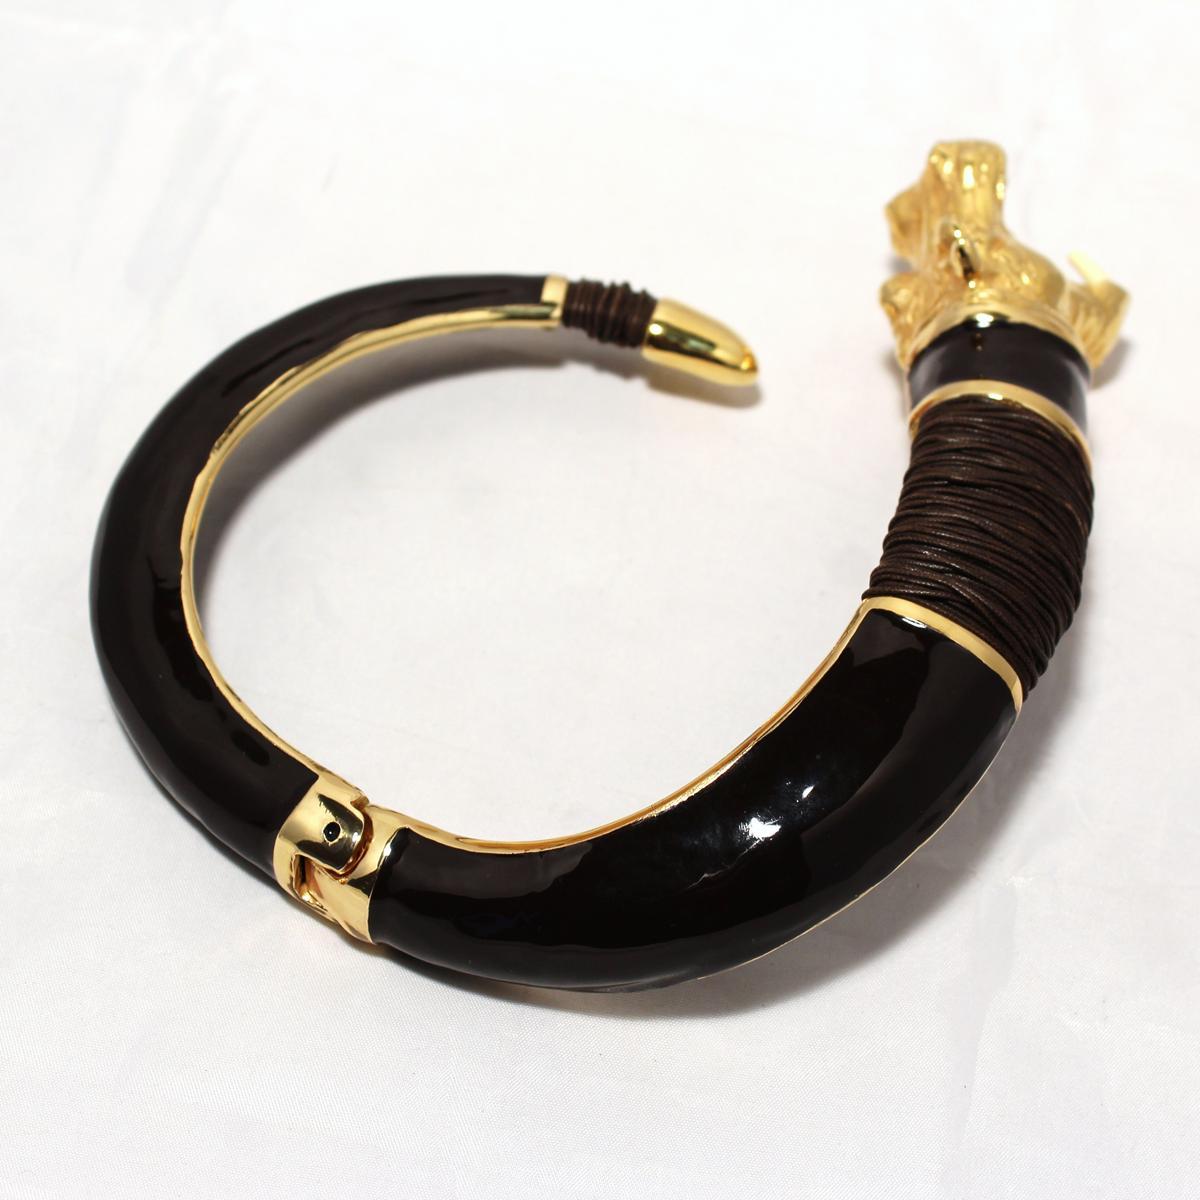 Amazing rigid collier by Creart Italy
Brass
Golden dipped
Fired enamel
Hippo theme
Leather cord
Purchase at ANTONIA Milano
Worldwide express shipping included in the price !